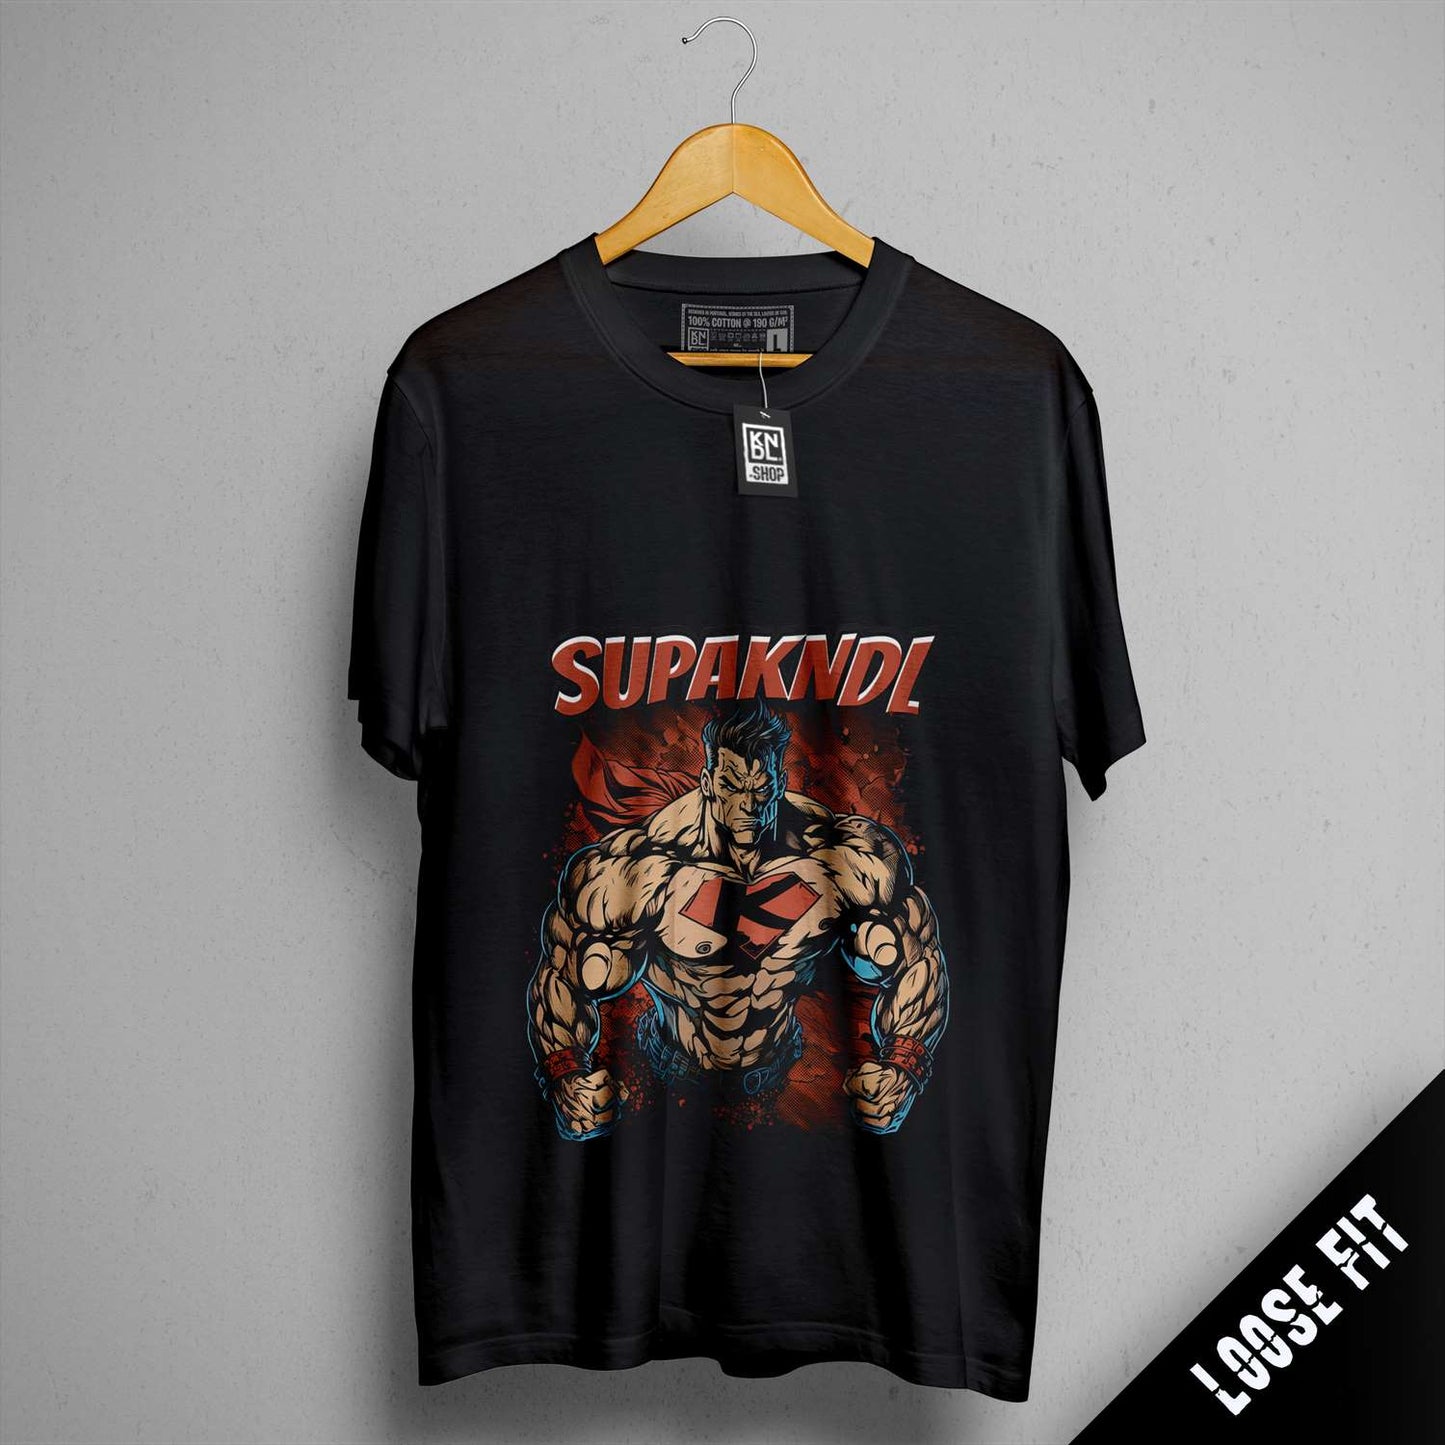 a black t - shirt with a picture of a wrestler on it